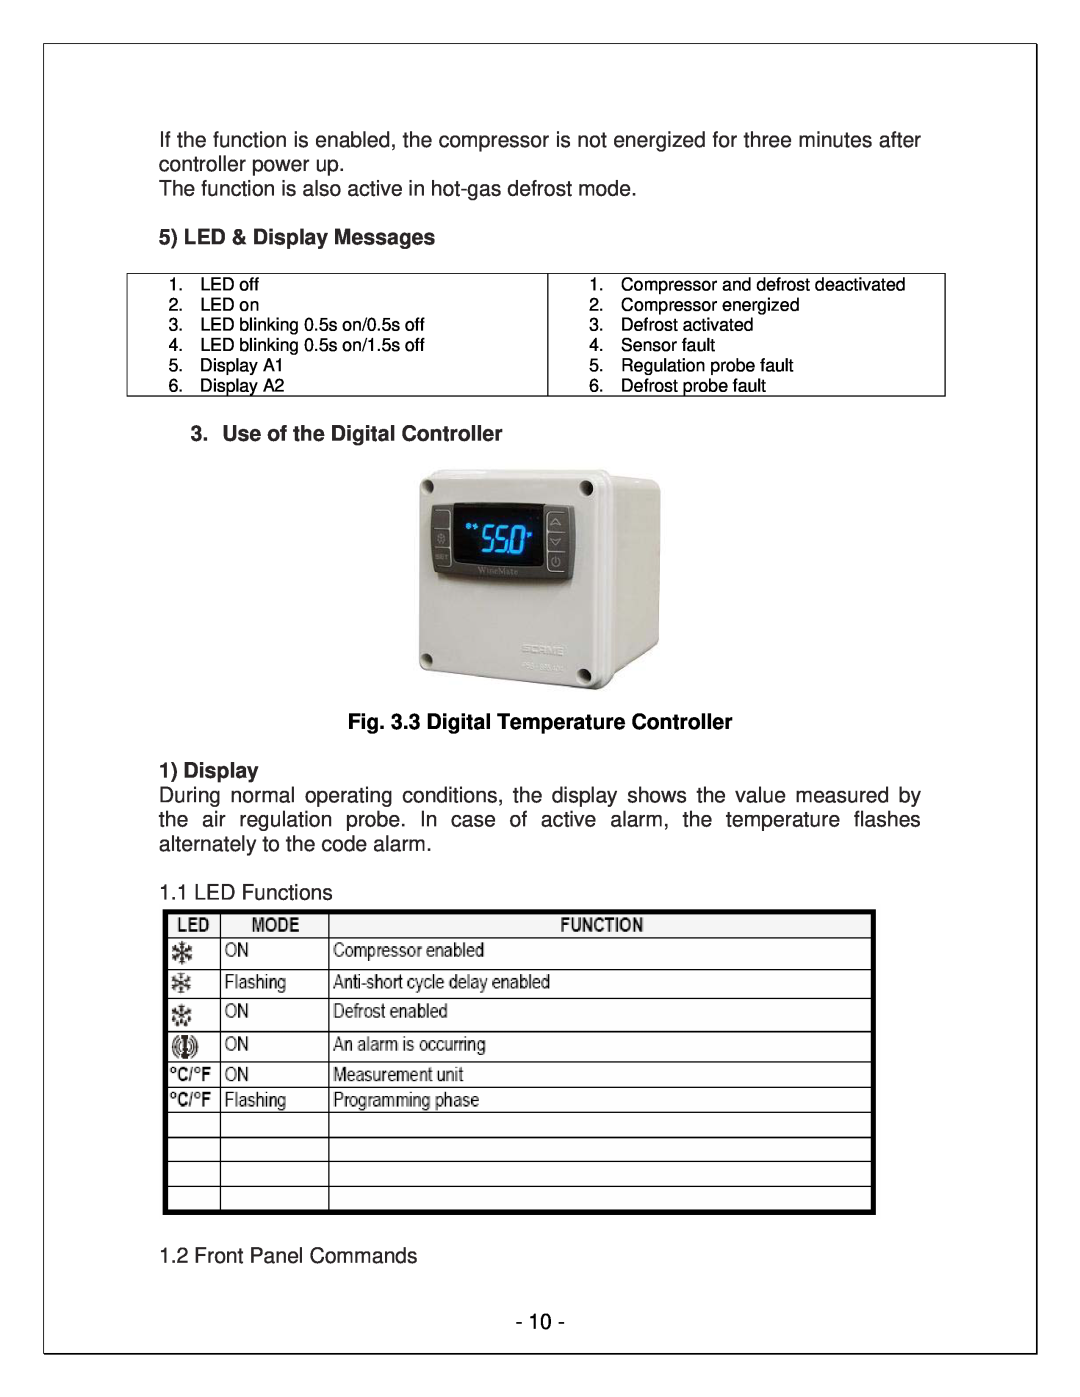 Vinotemp VINO4500DS, VINO6500DS LED & Display Messages, Use of the Digital Controller, 3 Digital Temperature Controller 